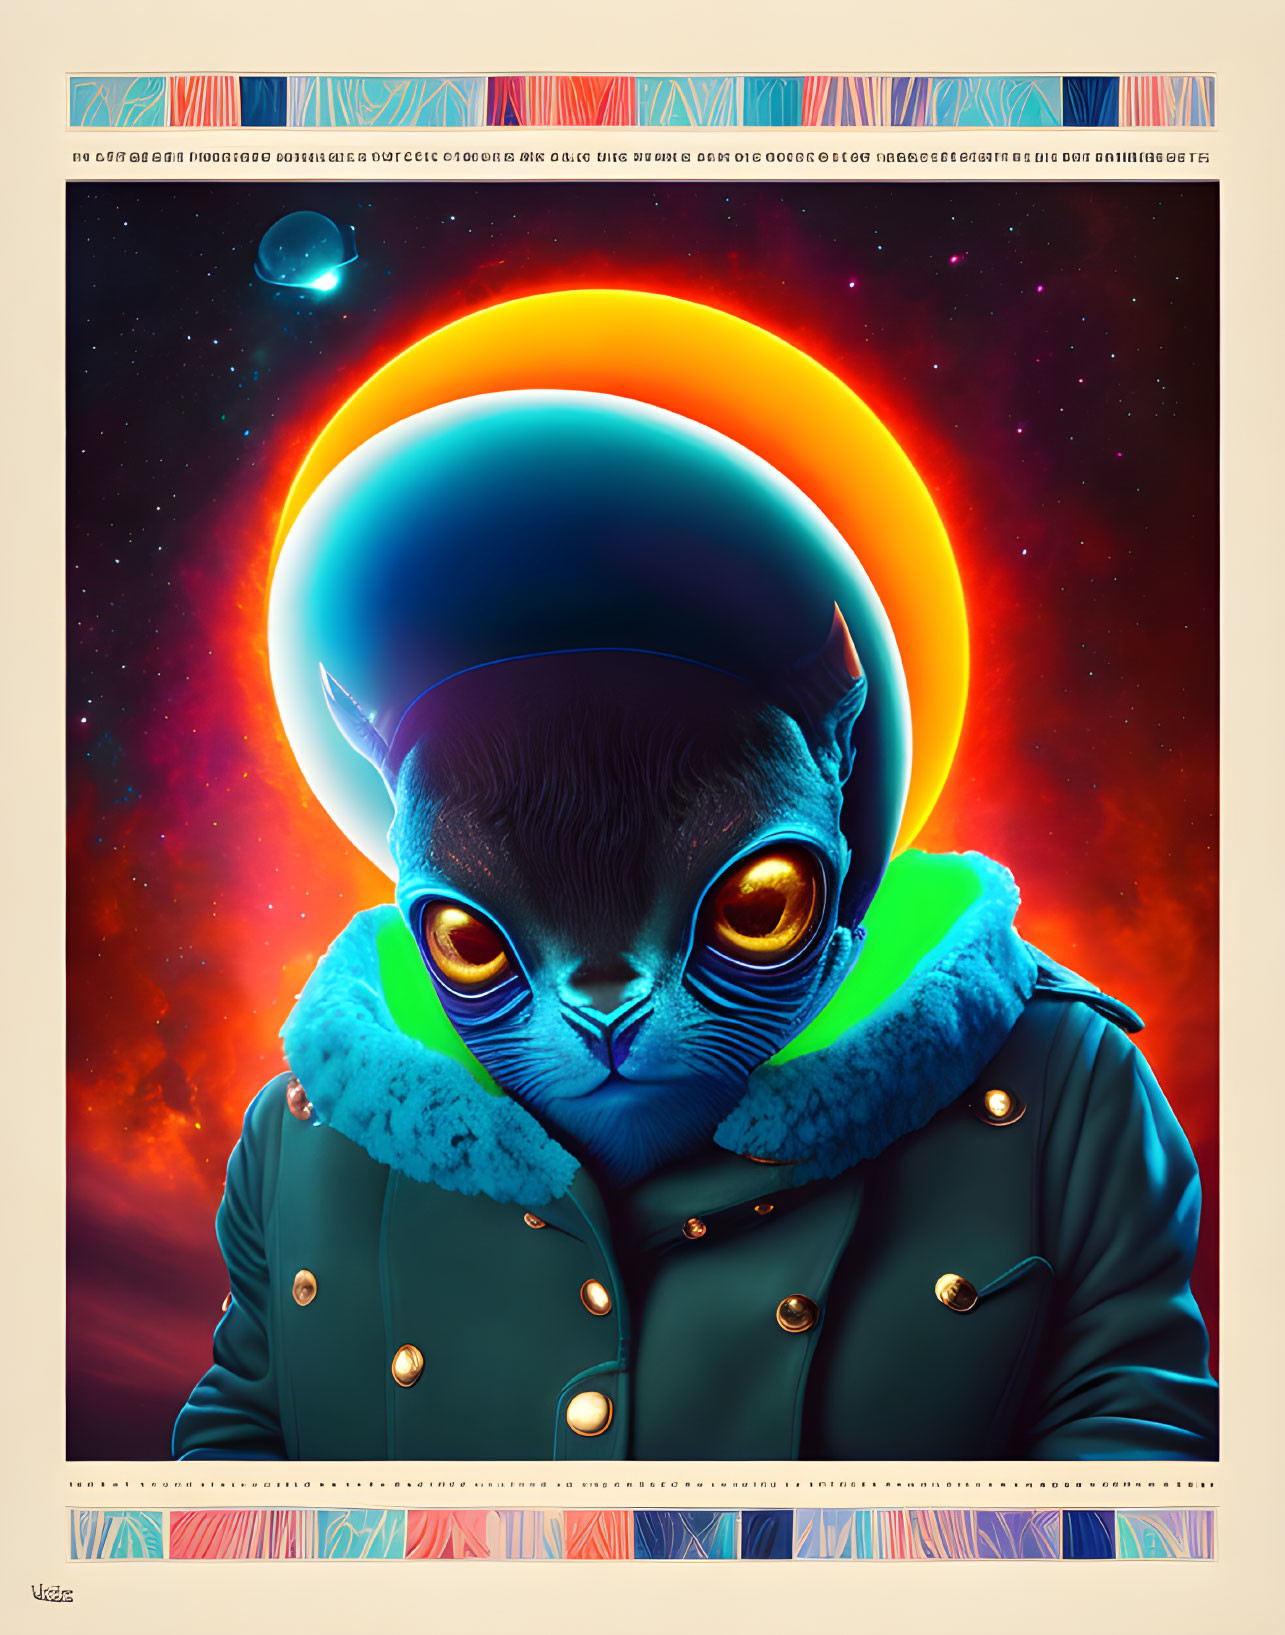 Colorful Cat Illustration with Cosmic Halo Rings and Winter Jacket